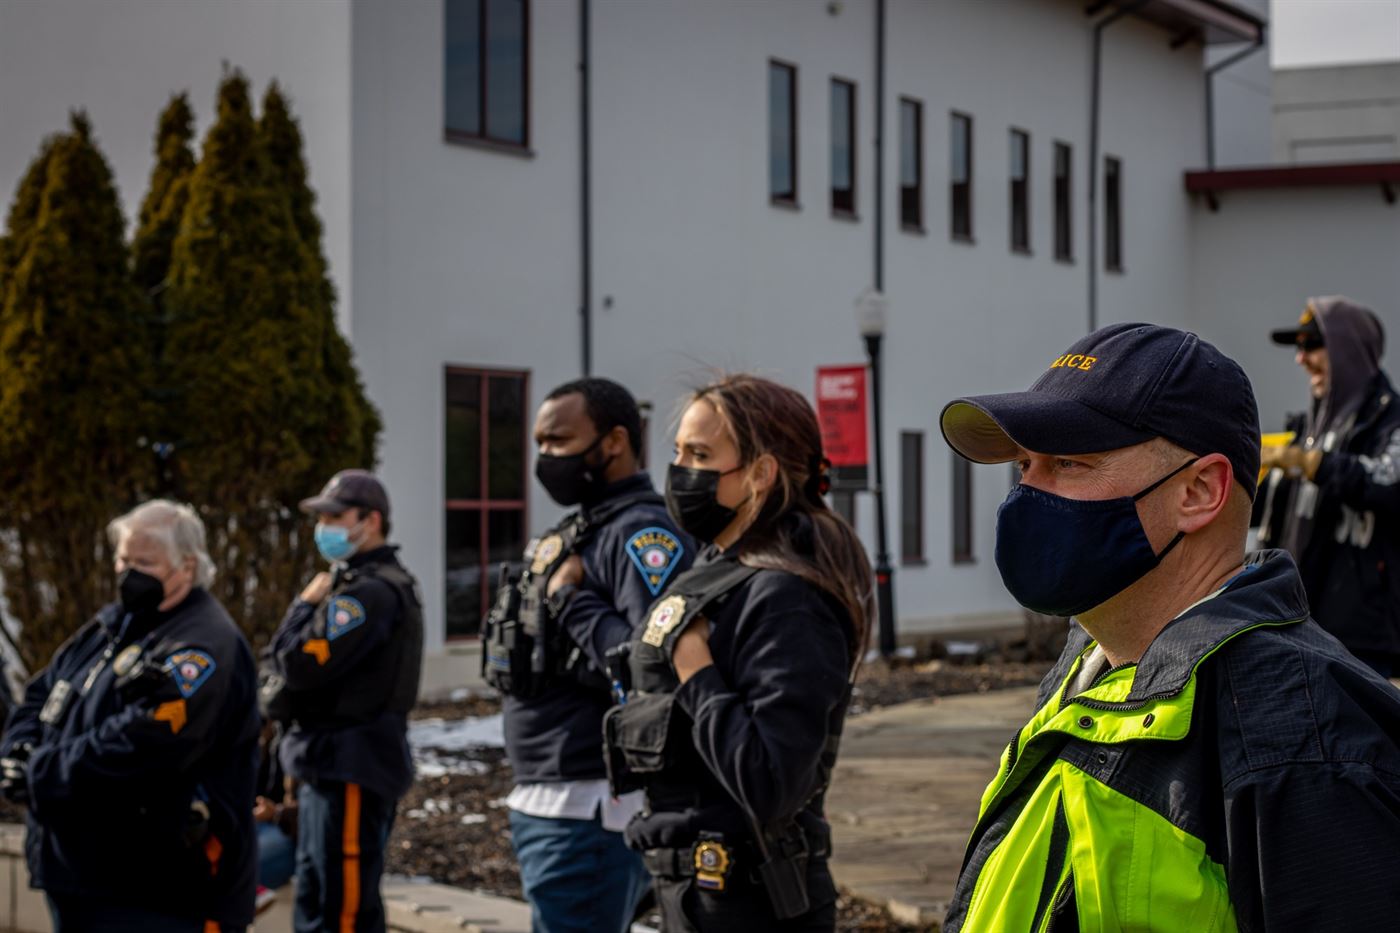 Members of the University Police Department standing in-front of the protesters. John LaRosa | The Montclarion